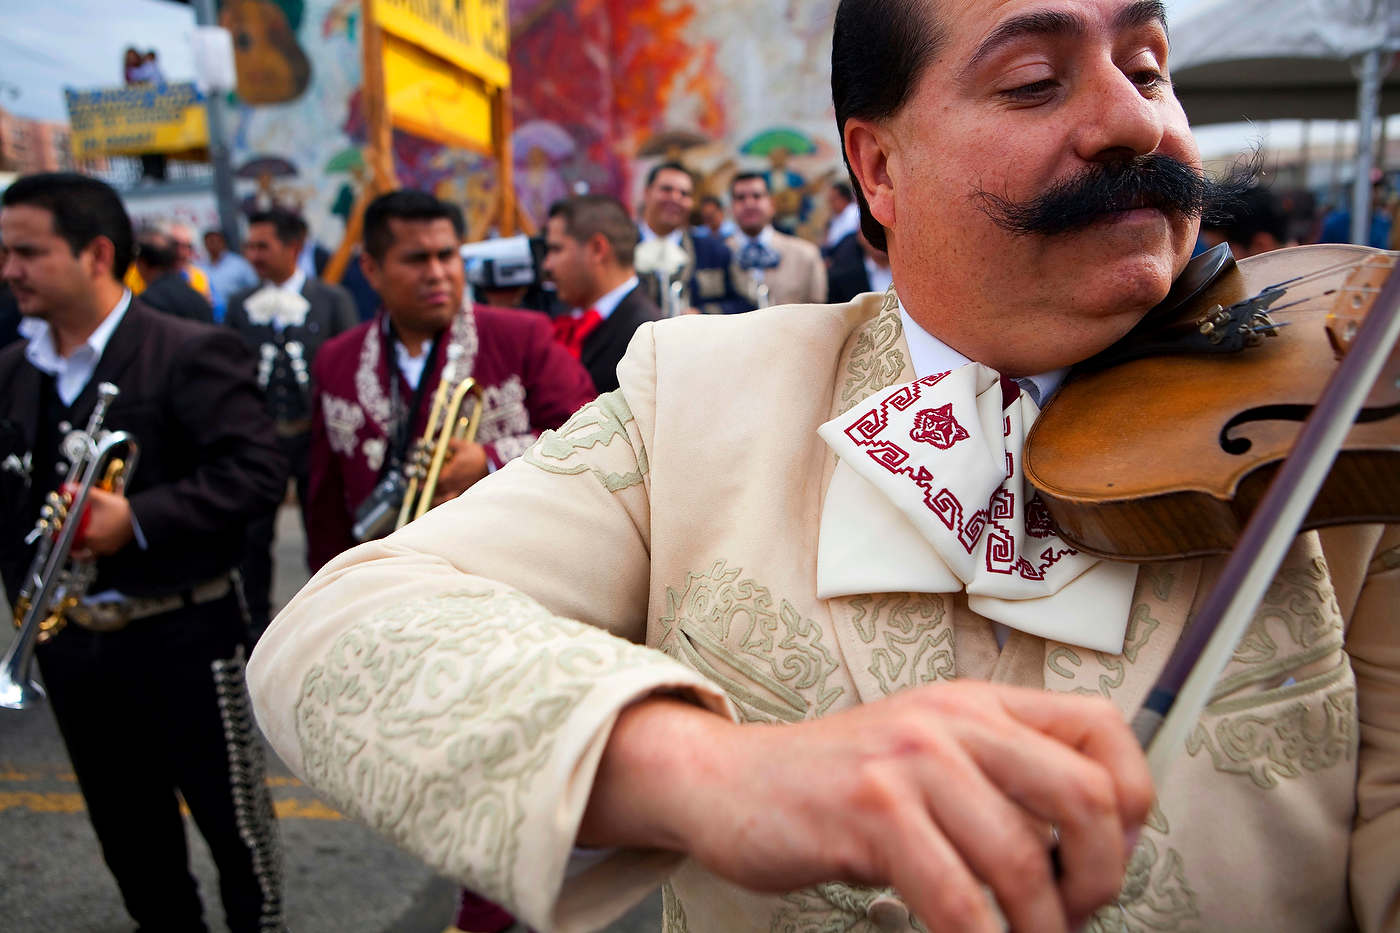 Mariachis_New14_008